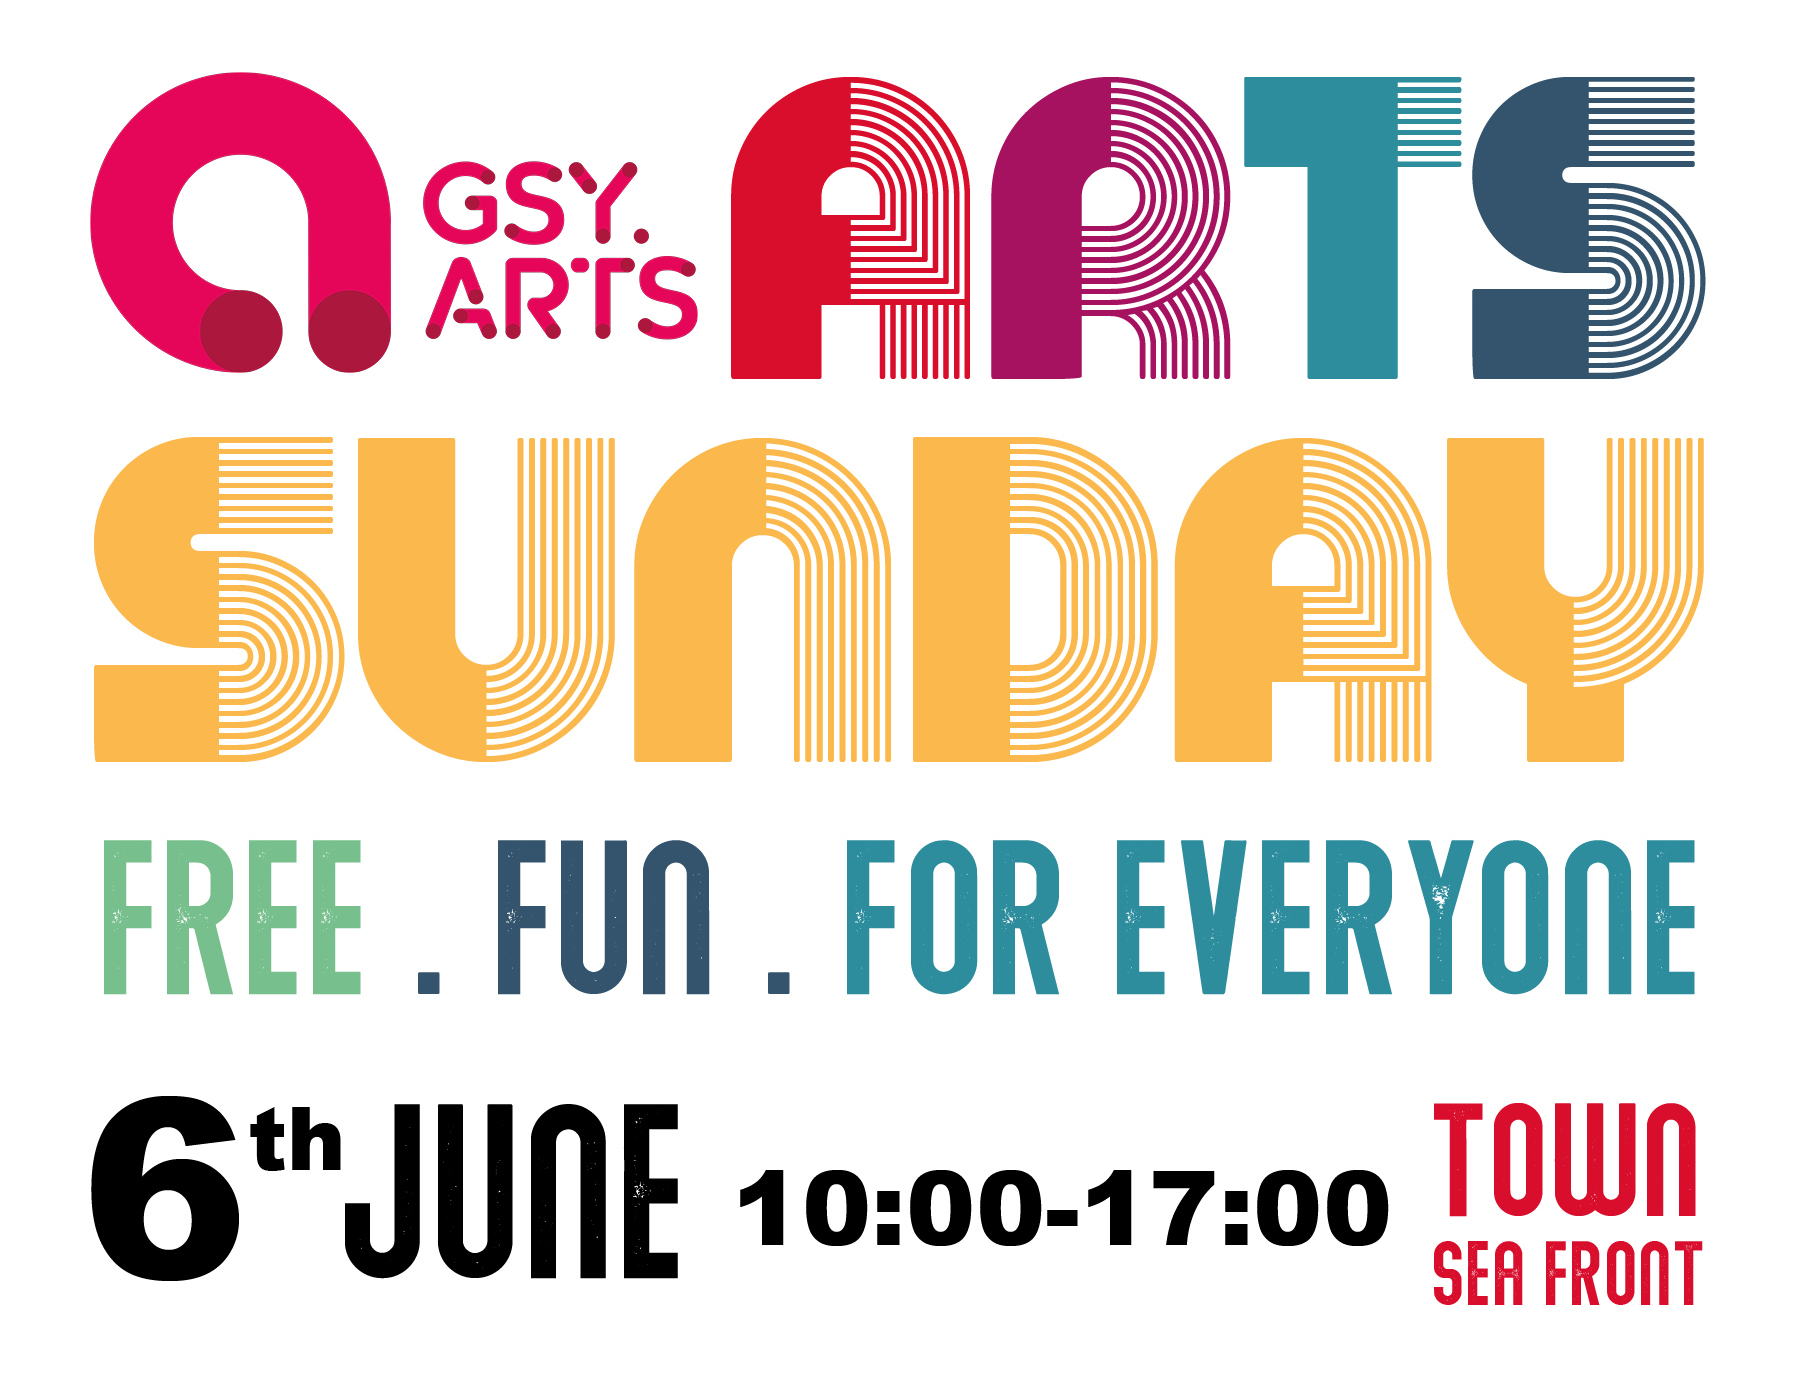 Arts Sunday 2021 will be going ahead on 6th June.